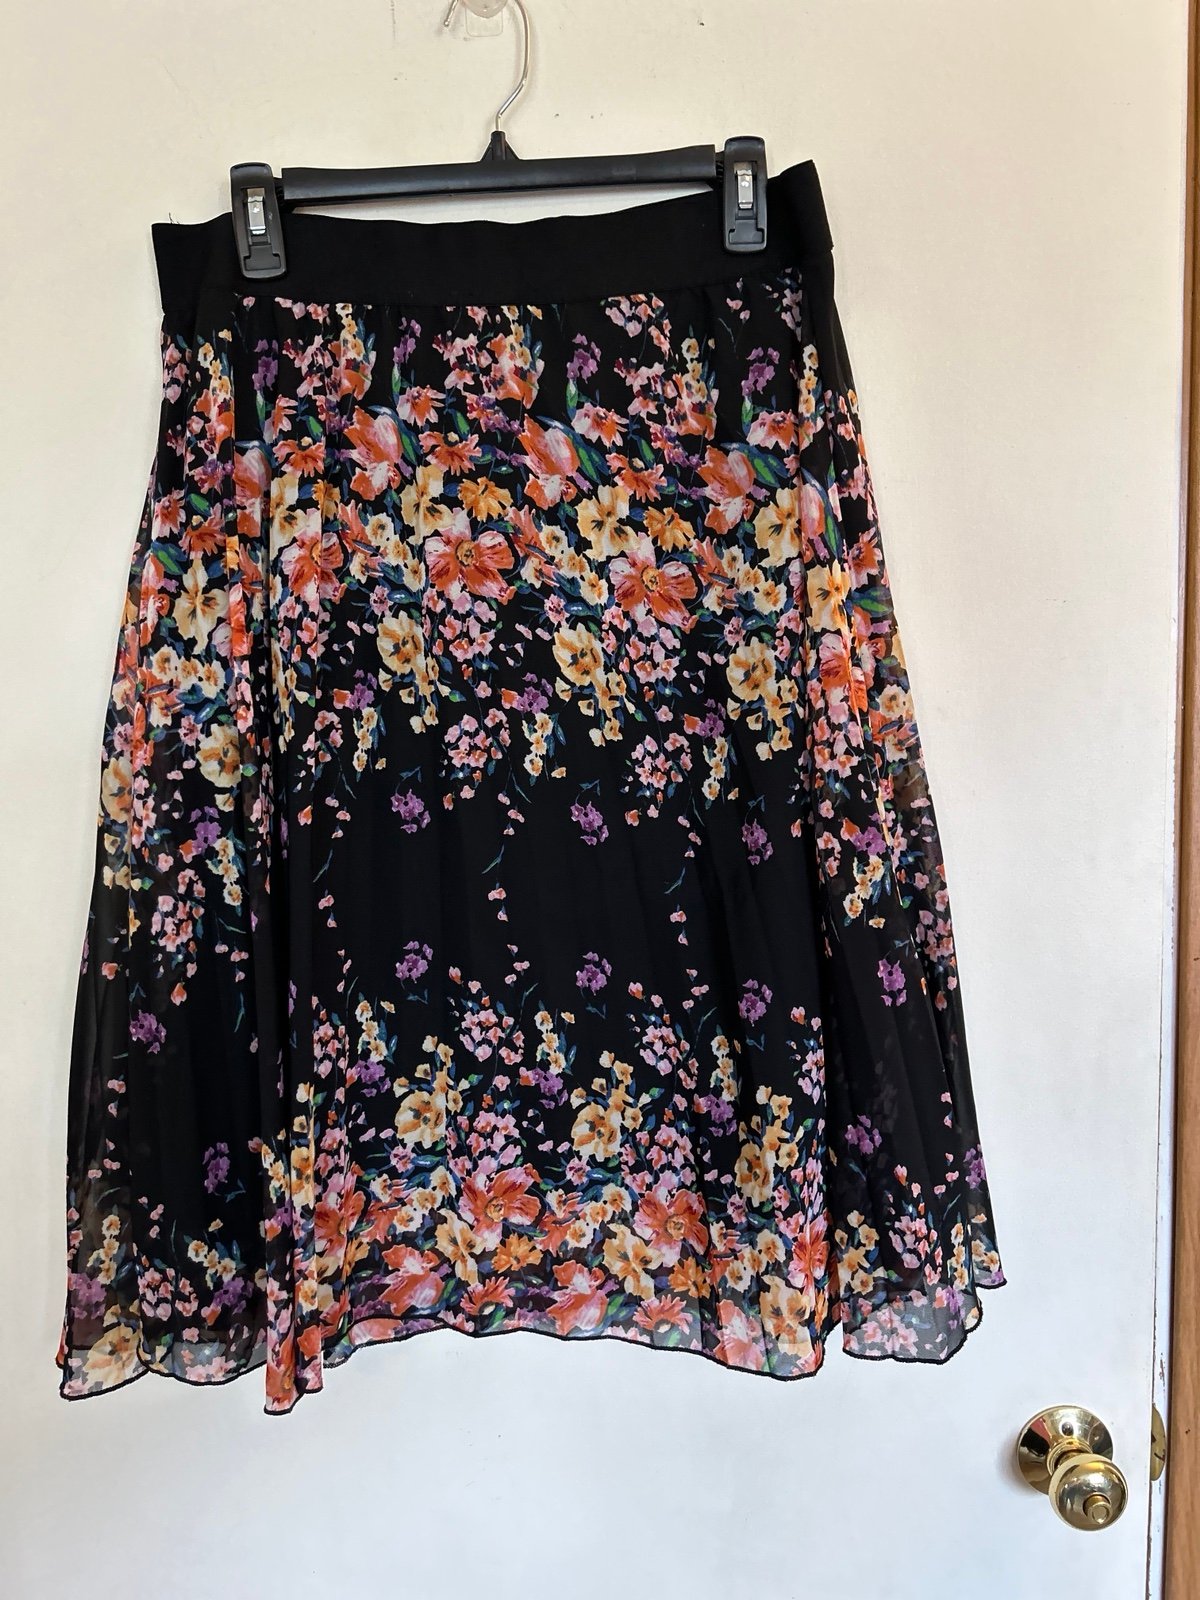 Elegant Compagnie Nouvelle Skirts Floral Pleated Skirt stretch pull on large NXzjTyQSk Zero Profit 